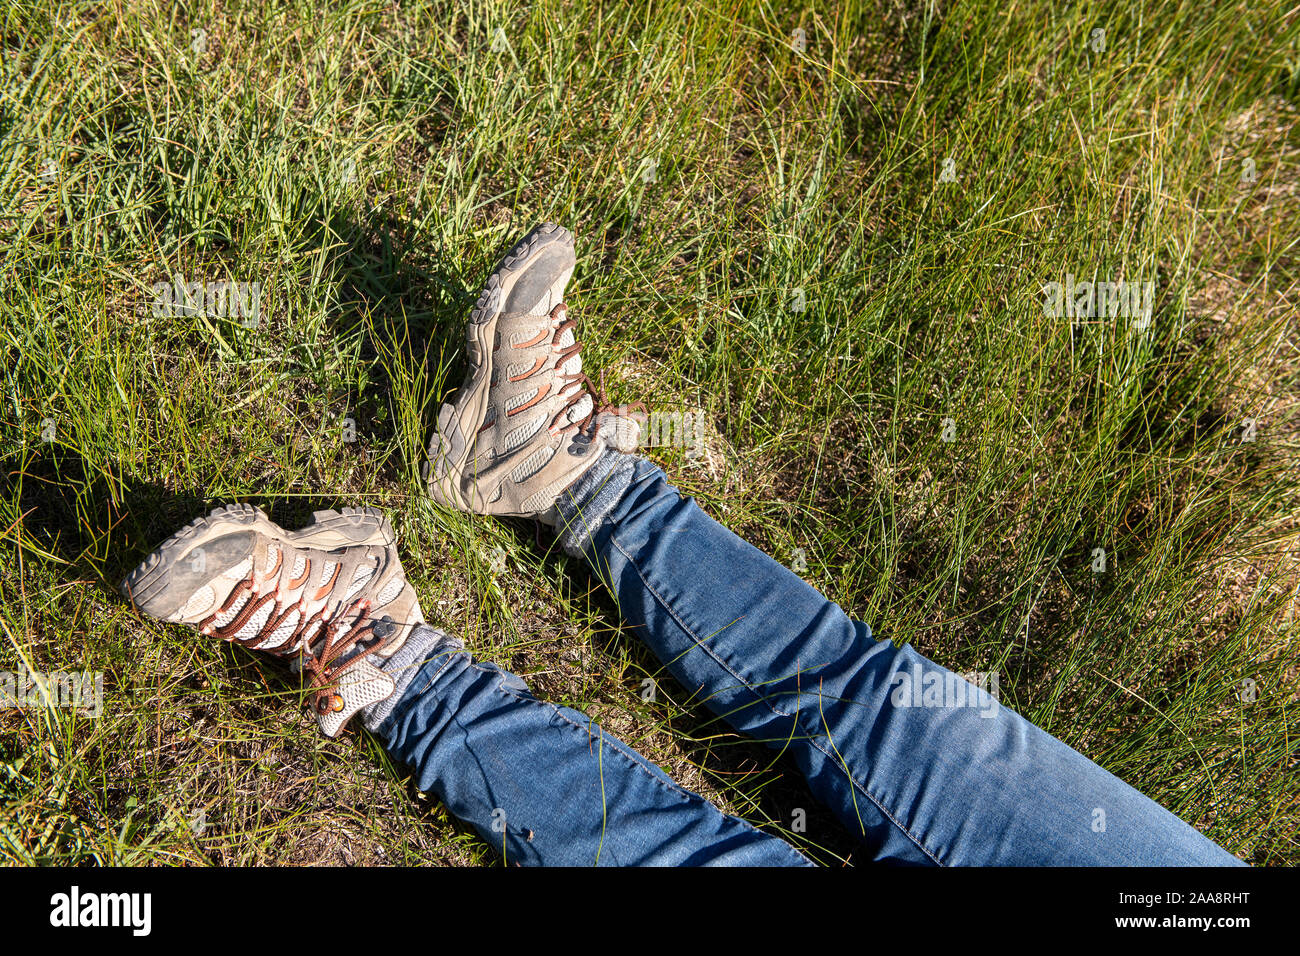 Legs in jeans and hiking boots laying in tall green grass Stock Photo